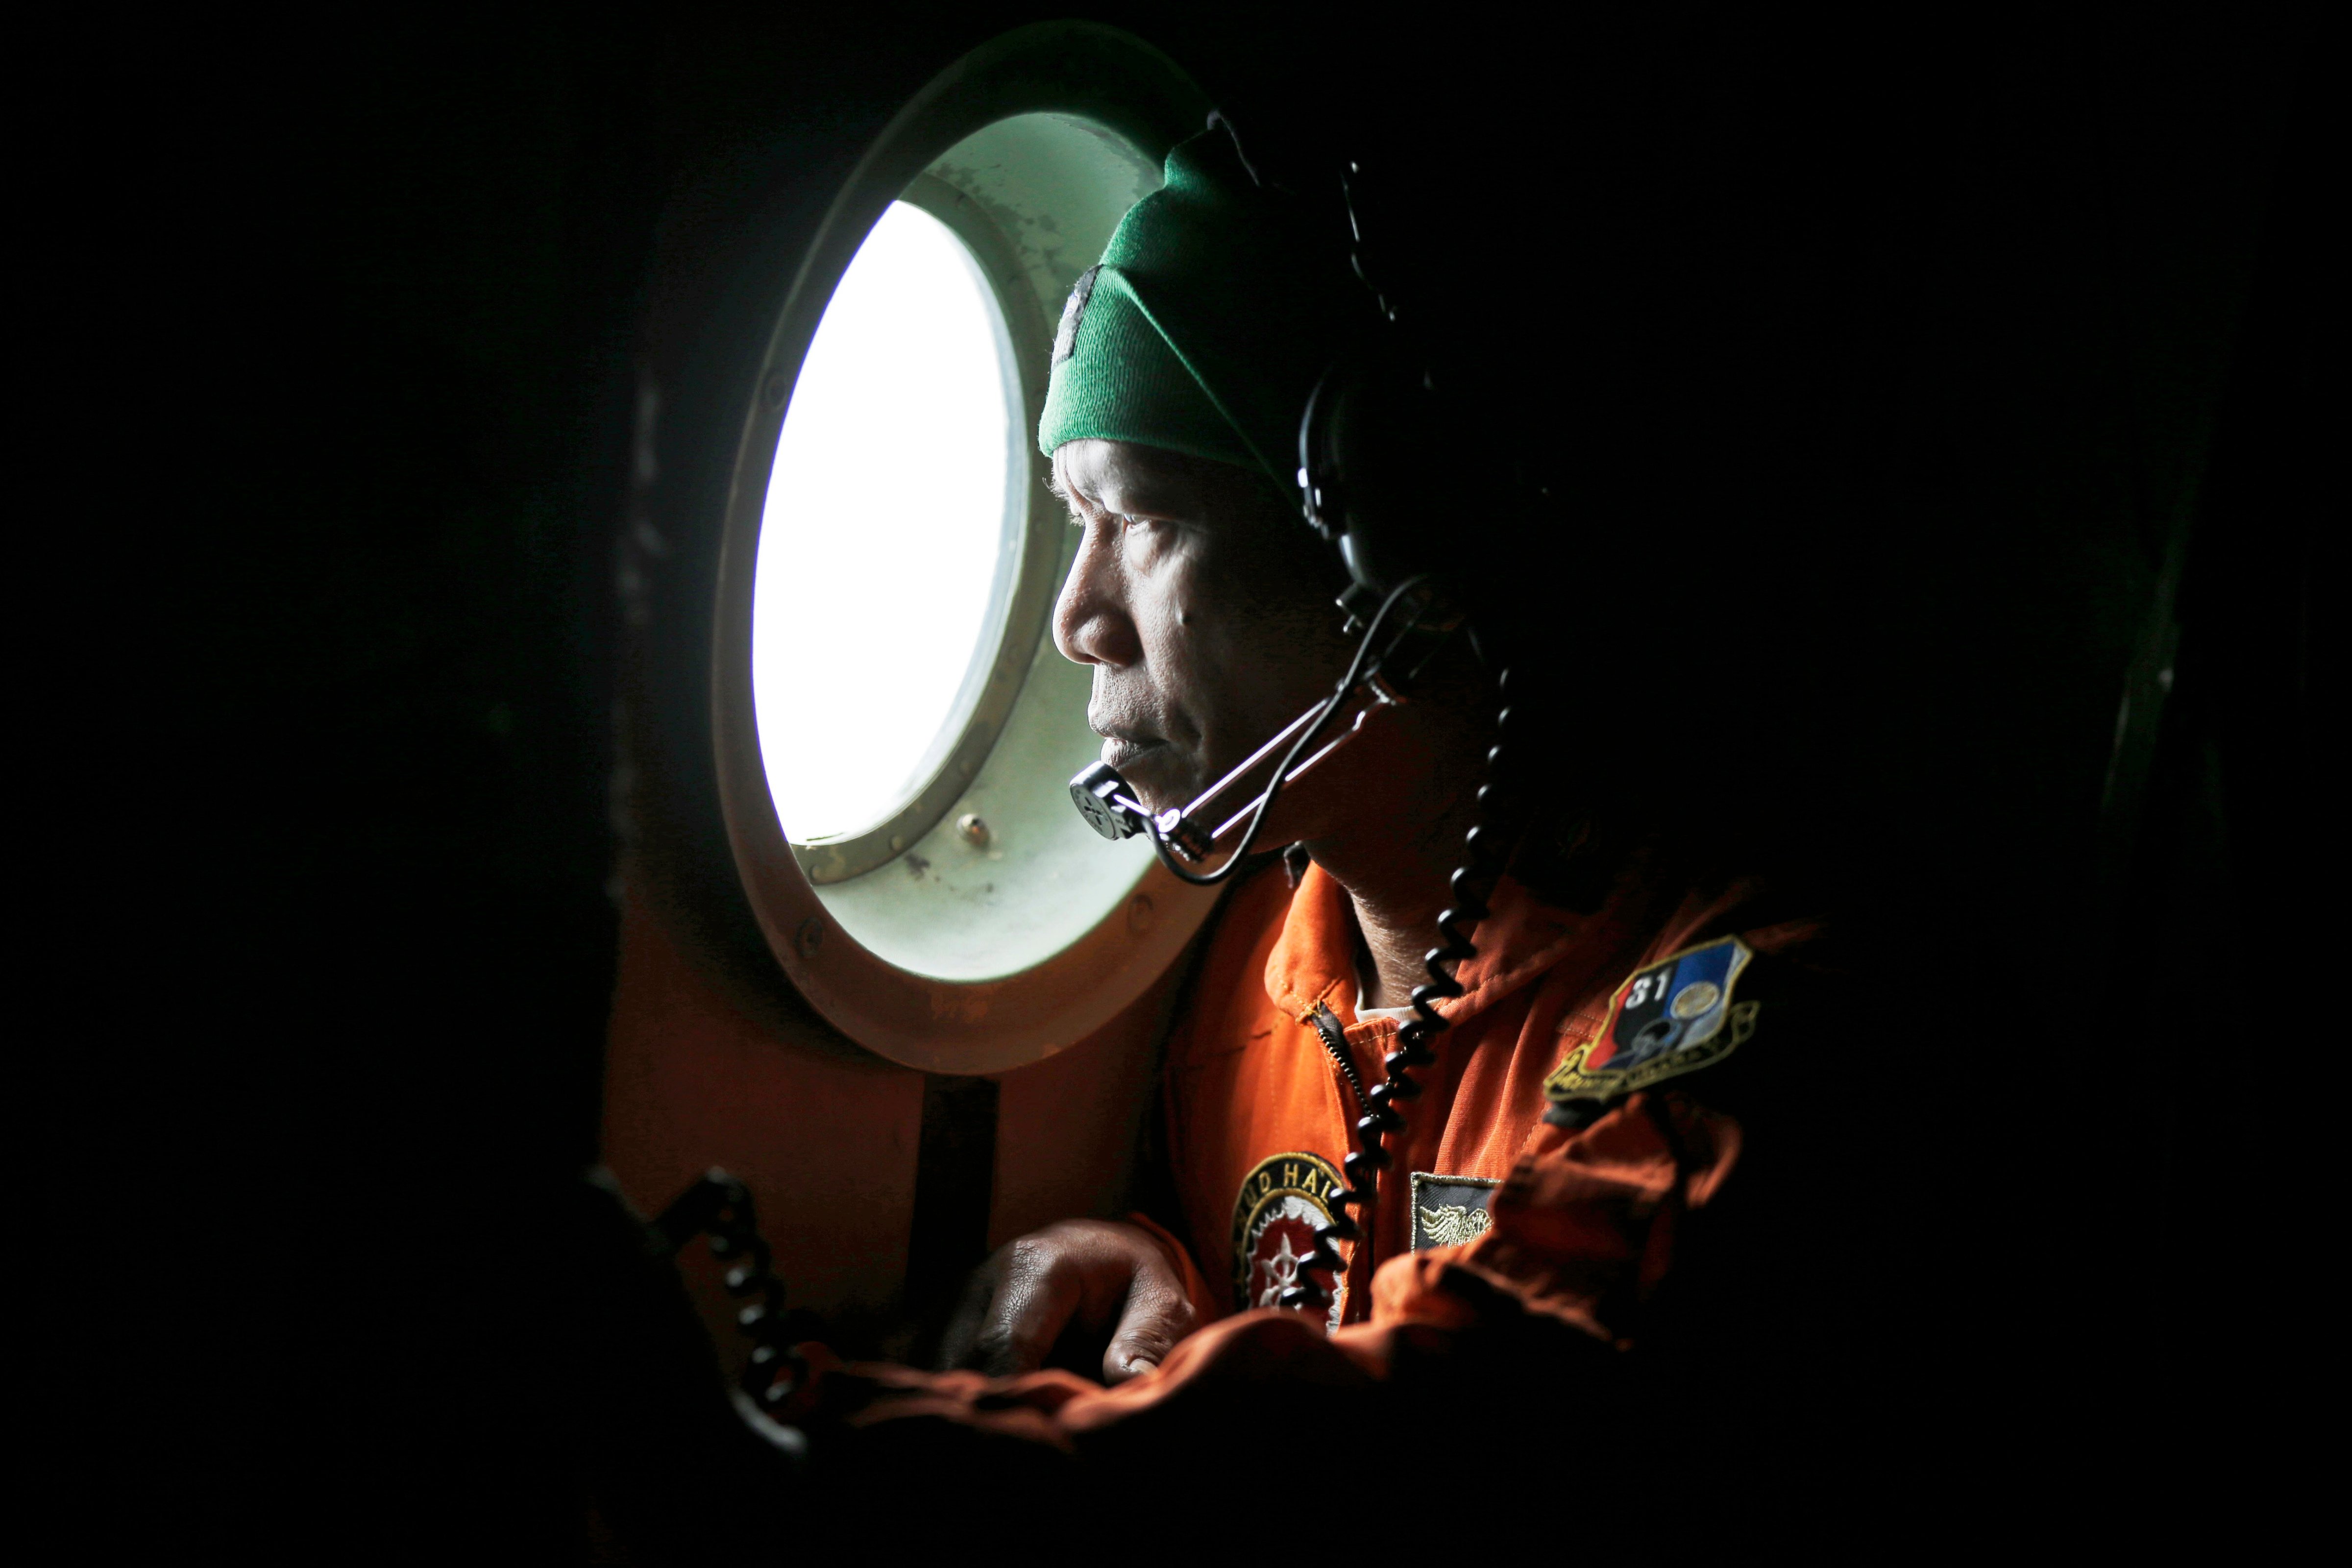 A crew of an Indonesian Air Force C-130 airplane of the 31st Air Squadron looks out of the window during a search operation for the missing AirAsia flight 8501 jetliner over the waters of Karimata Strait in Indonesia on Dec. 29, 2014.